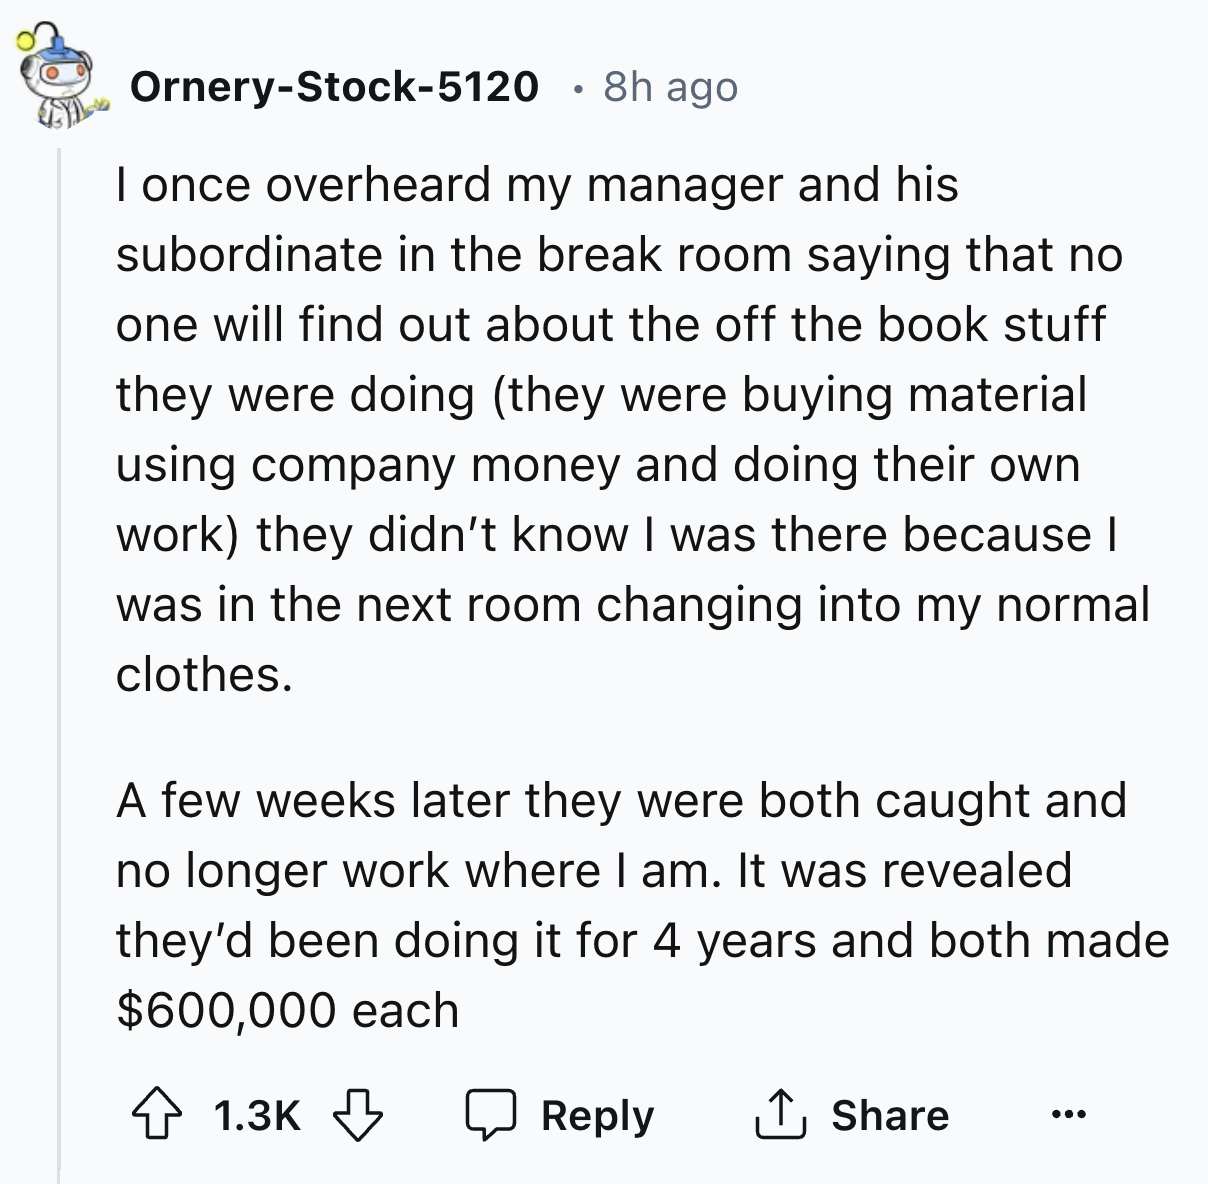 screenshot - OrneryStock5120 8h ago I once overheard my manager and his subordinate in the break room saying that no one will find out about the off the book stuff they were doing they were buying material using company money and doing their own work they